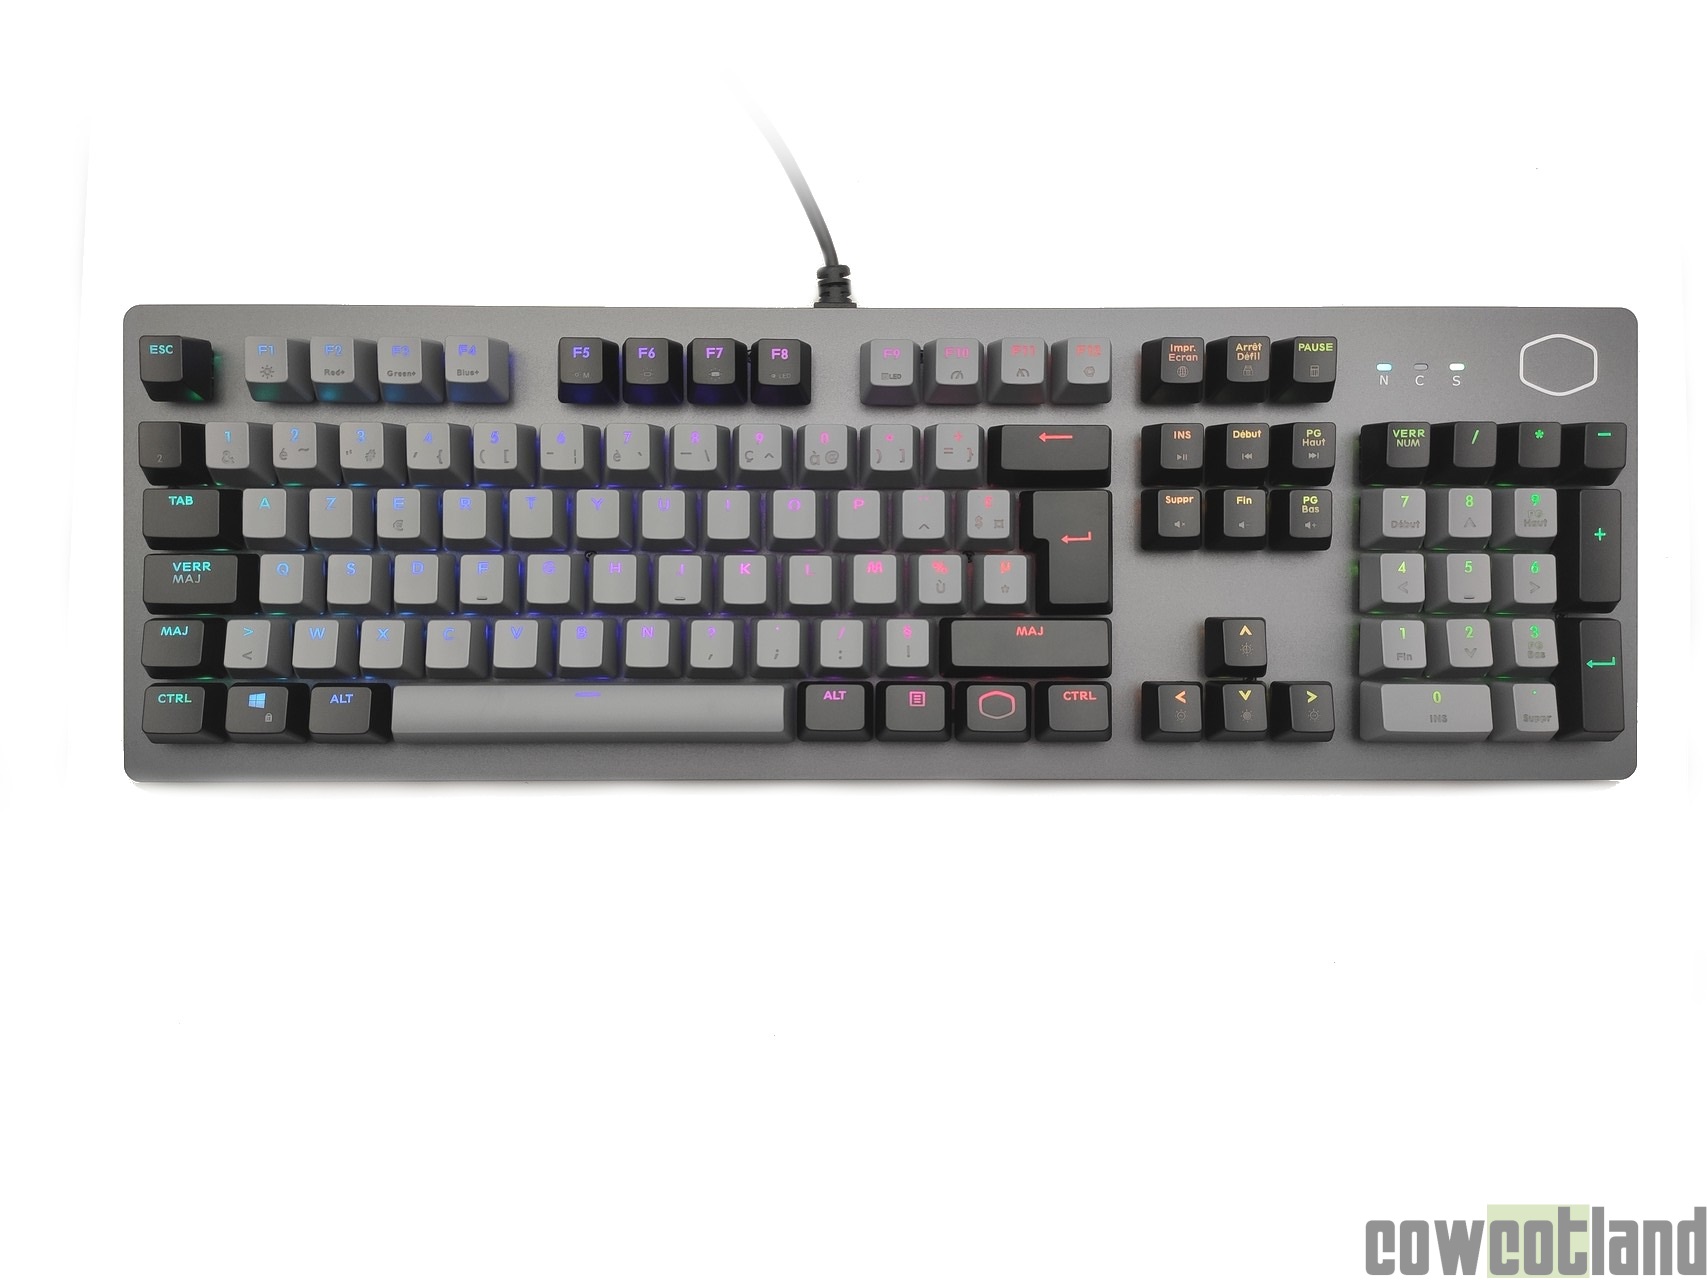 Image 46785, galerie Test clavier Cooler Master CK352 : un clavier plug-and-play  switchs optiques